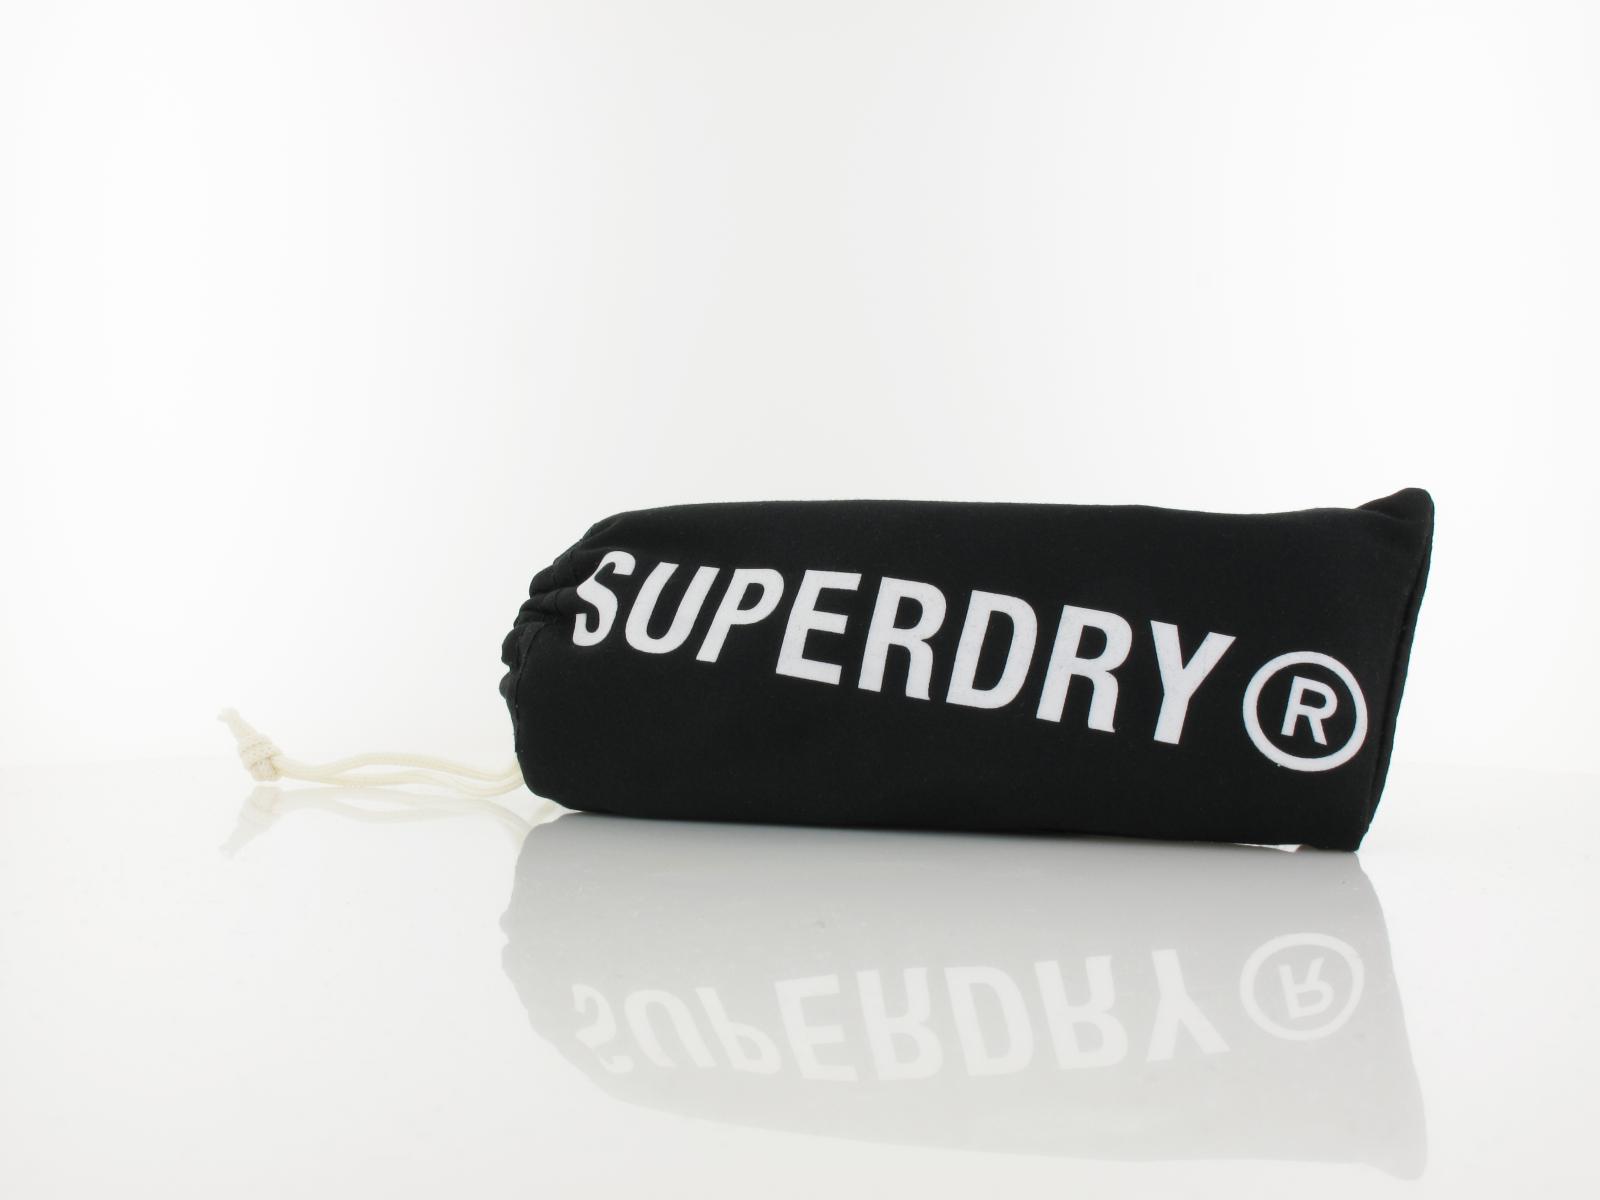 Superdry | Ace 006 57 | navy lime / solid smoke with silver mirror